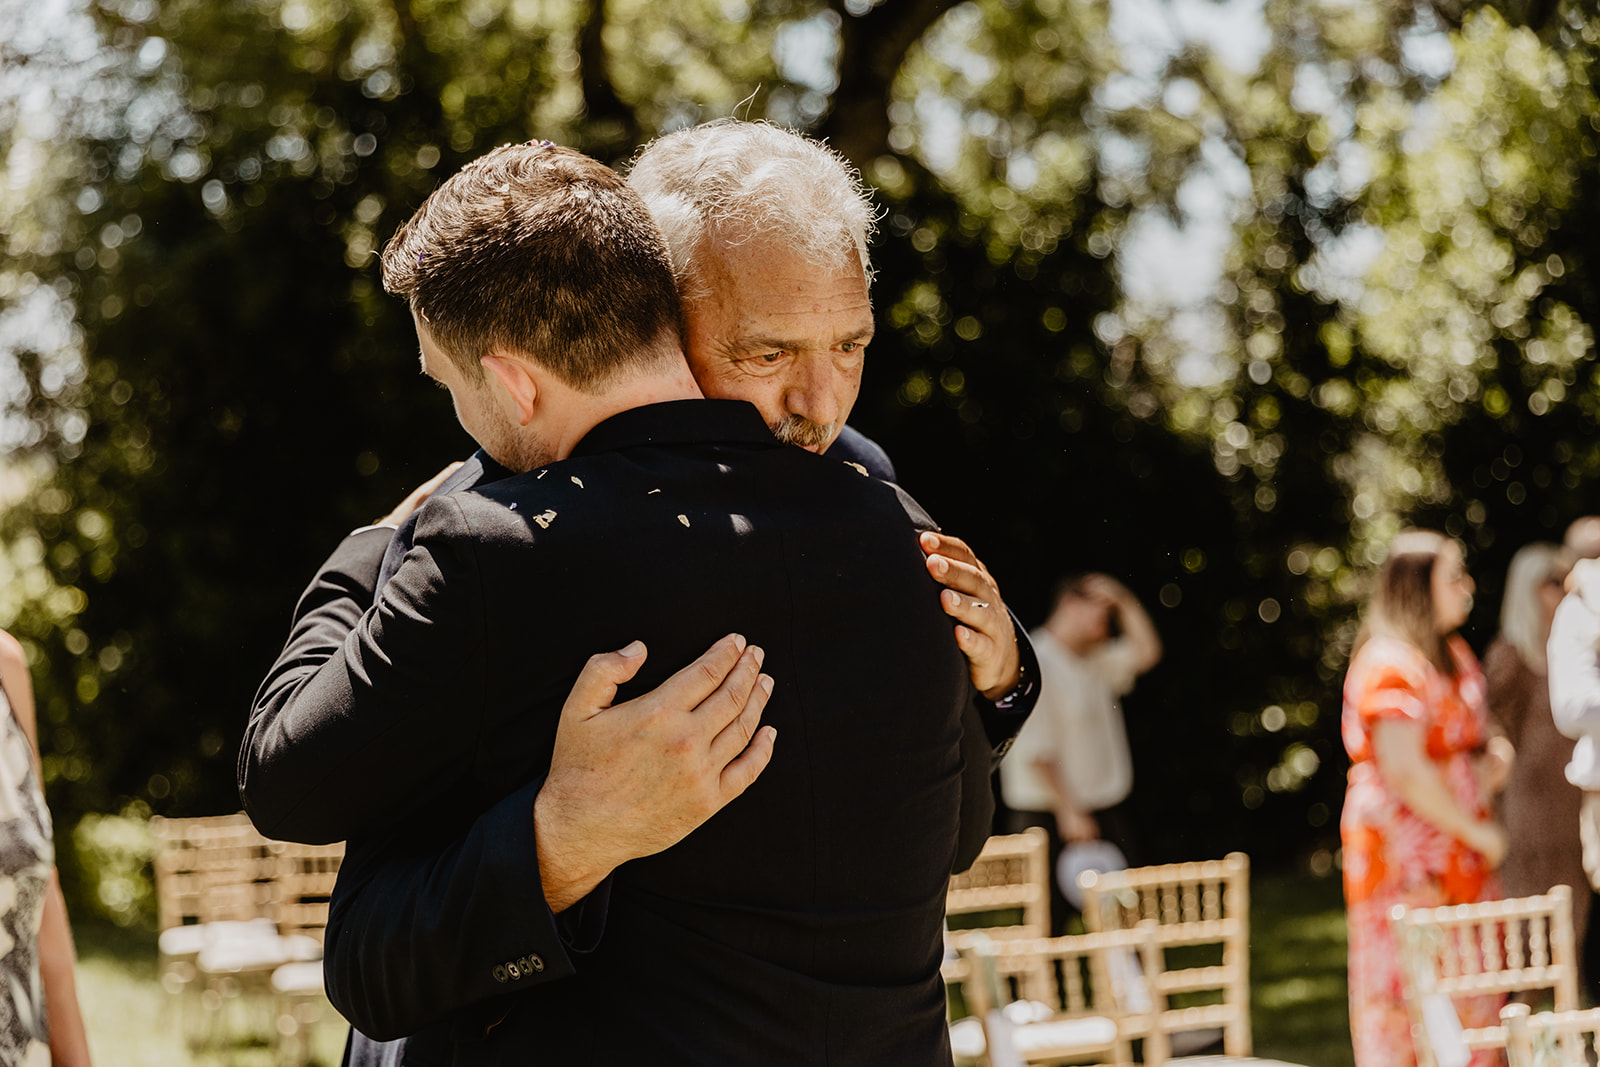 Groom hugging his dad at a Destination Wedding in France. Photography & Videography by OliveJoy Photography